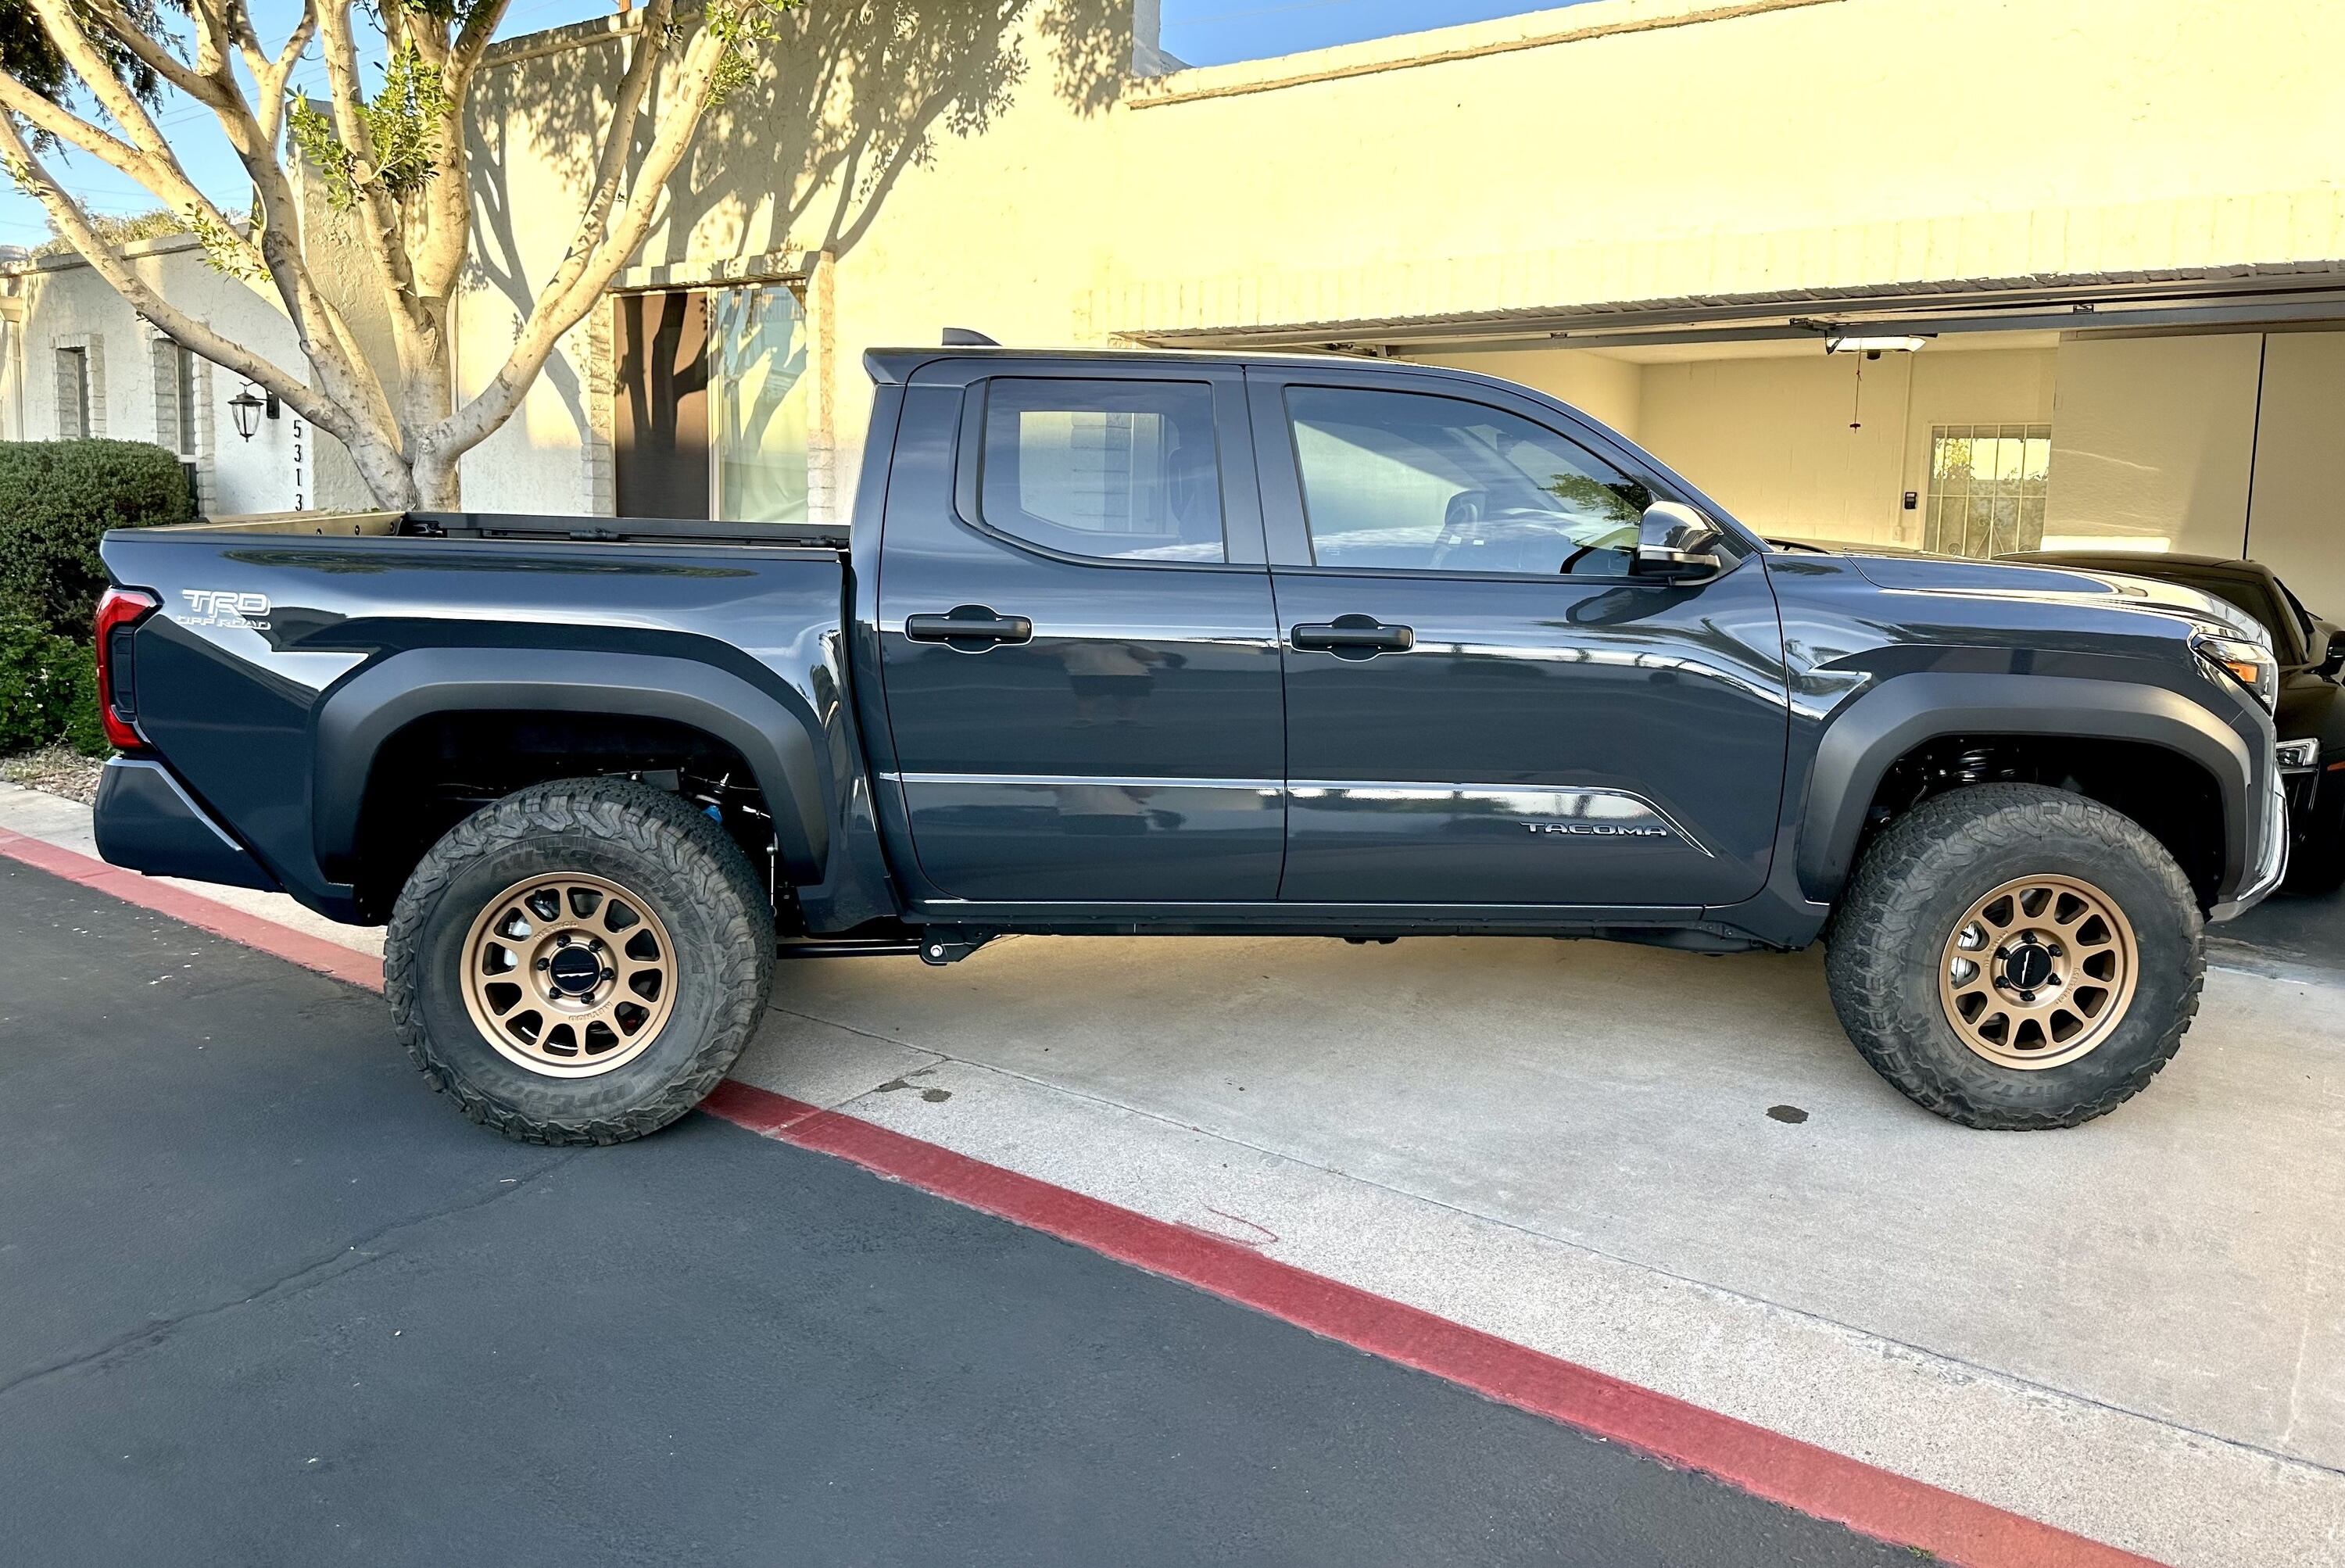 33's (285:70:17 tires) with 703 Method wheels (+35 offset) on factory suspension 2024 Tacoma ...jpeg's (285:70:17 tires) with 703 Method wheels (+35 offset) on factory suspension 2024 Tacoma ...jpeg